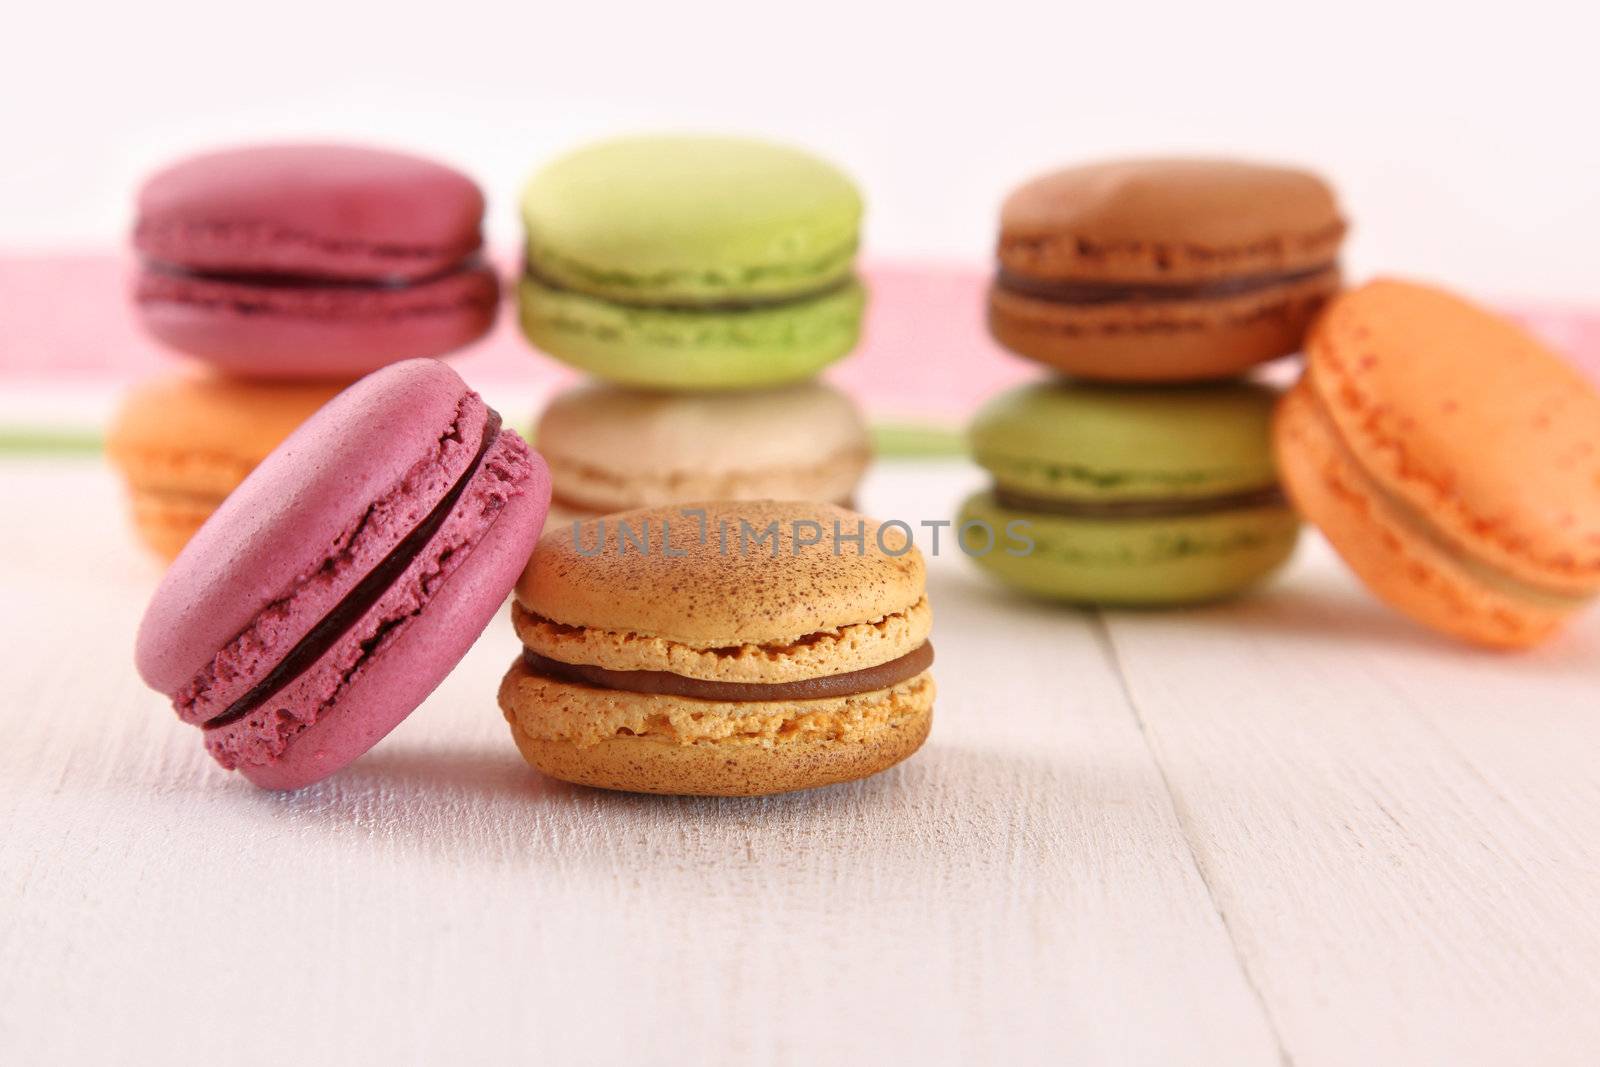 Delicious macaroons on wood table